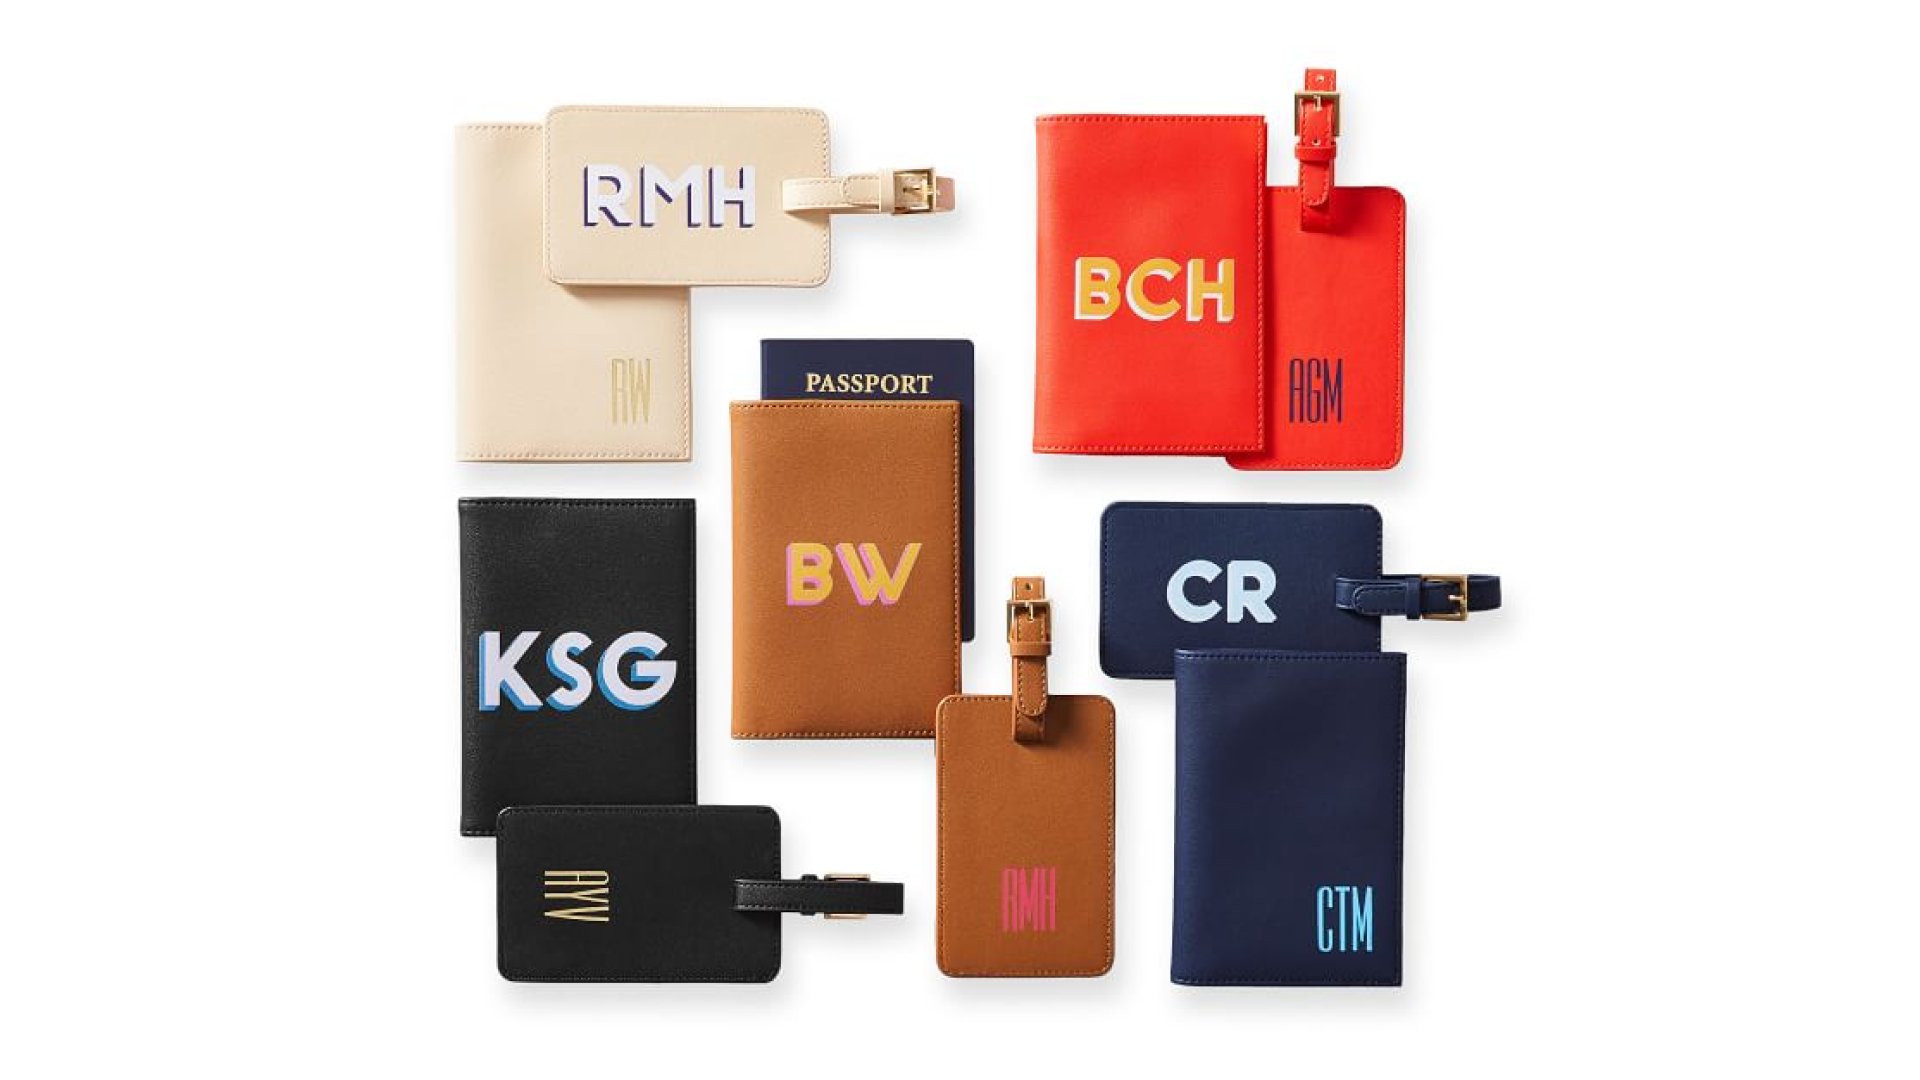 luggage tags and passport holders